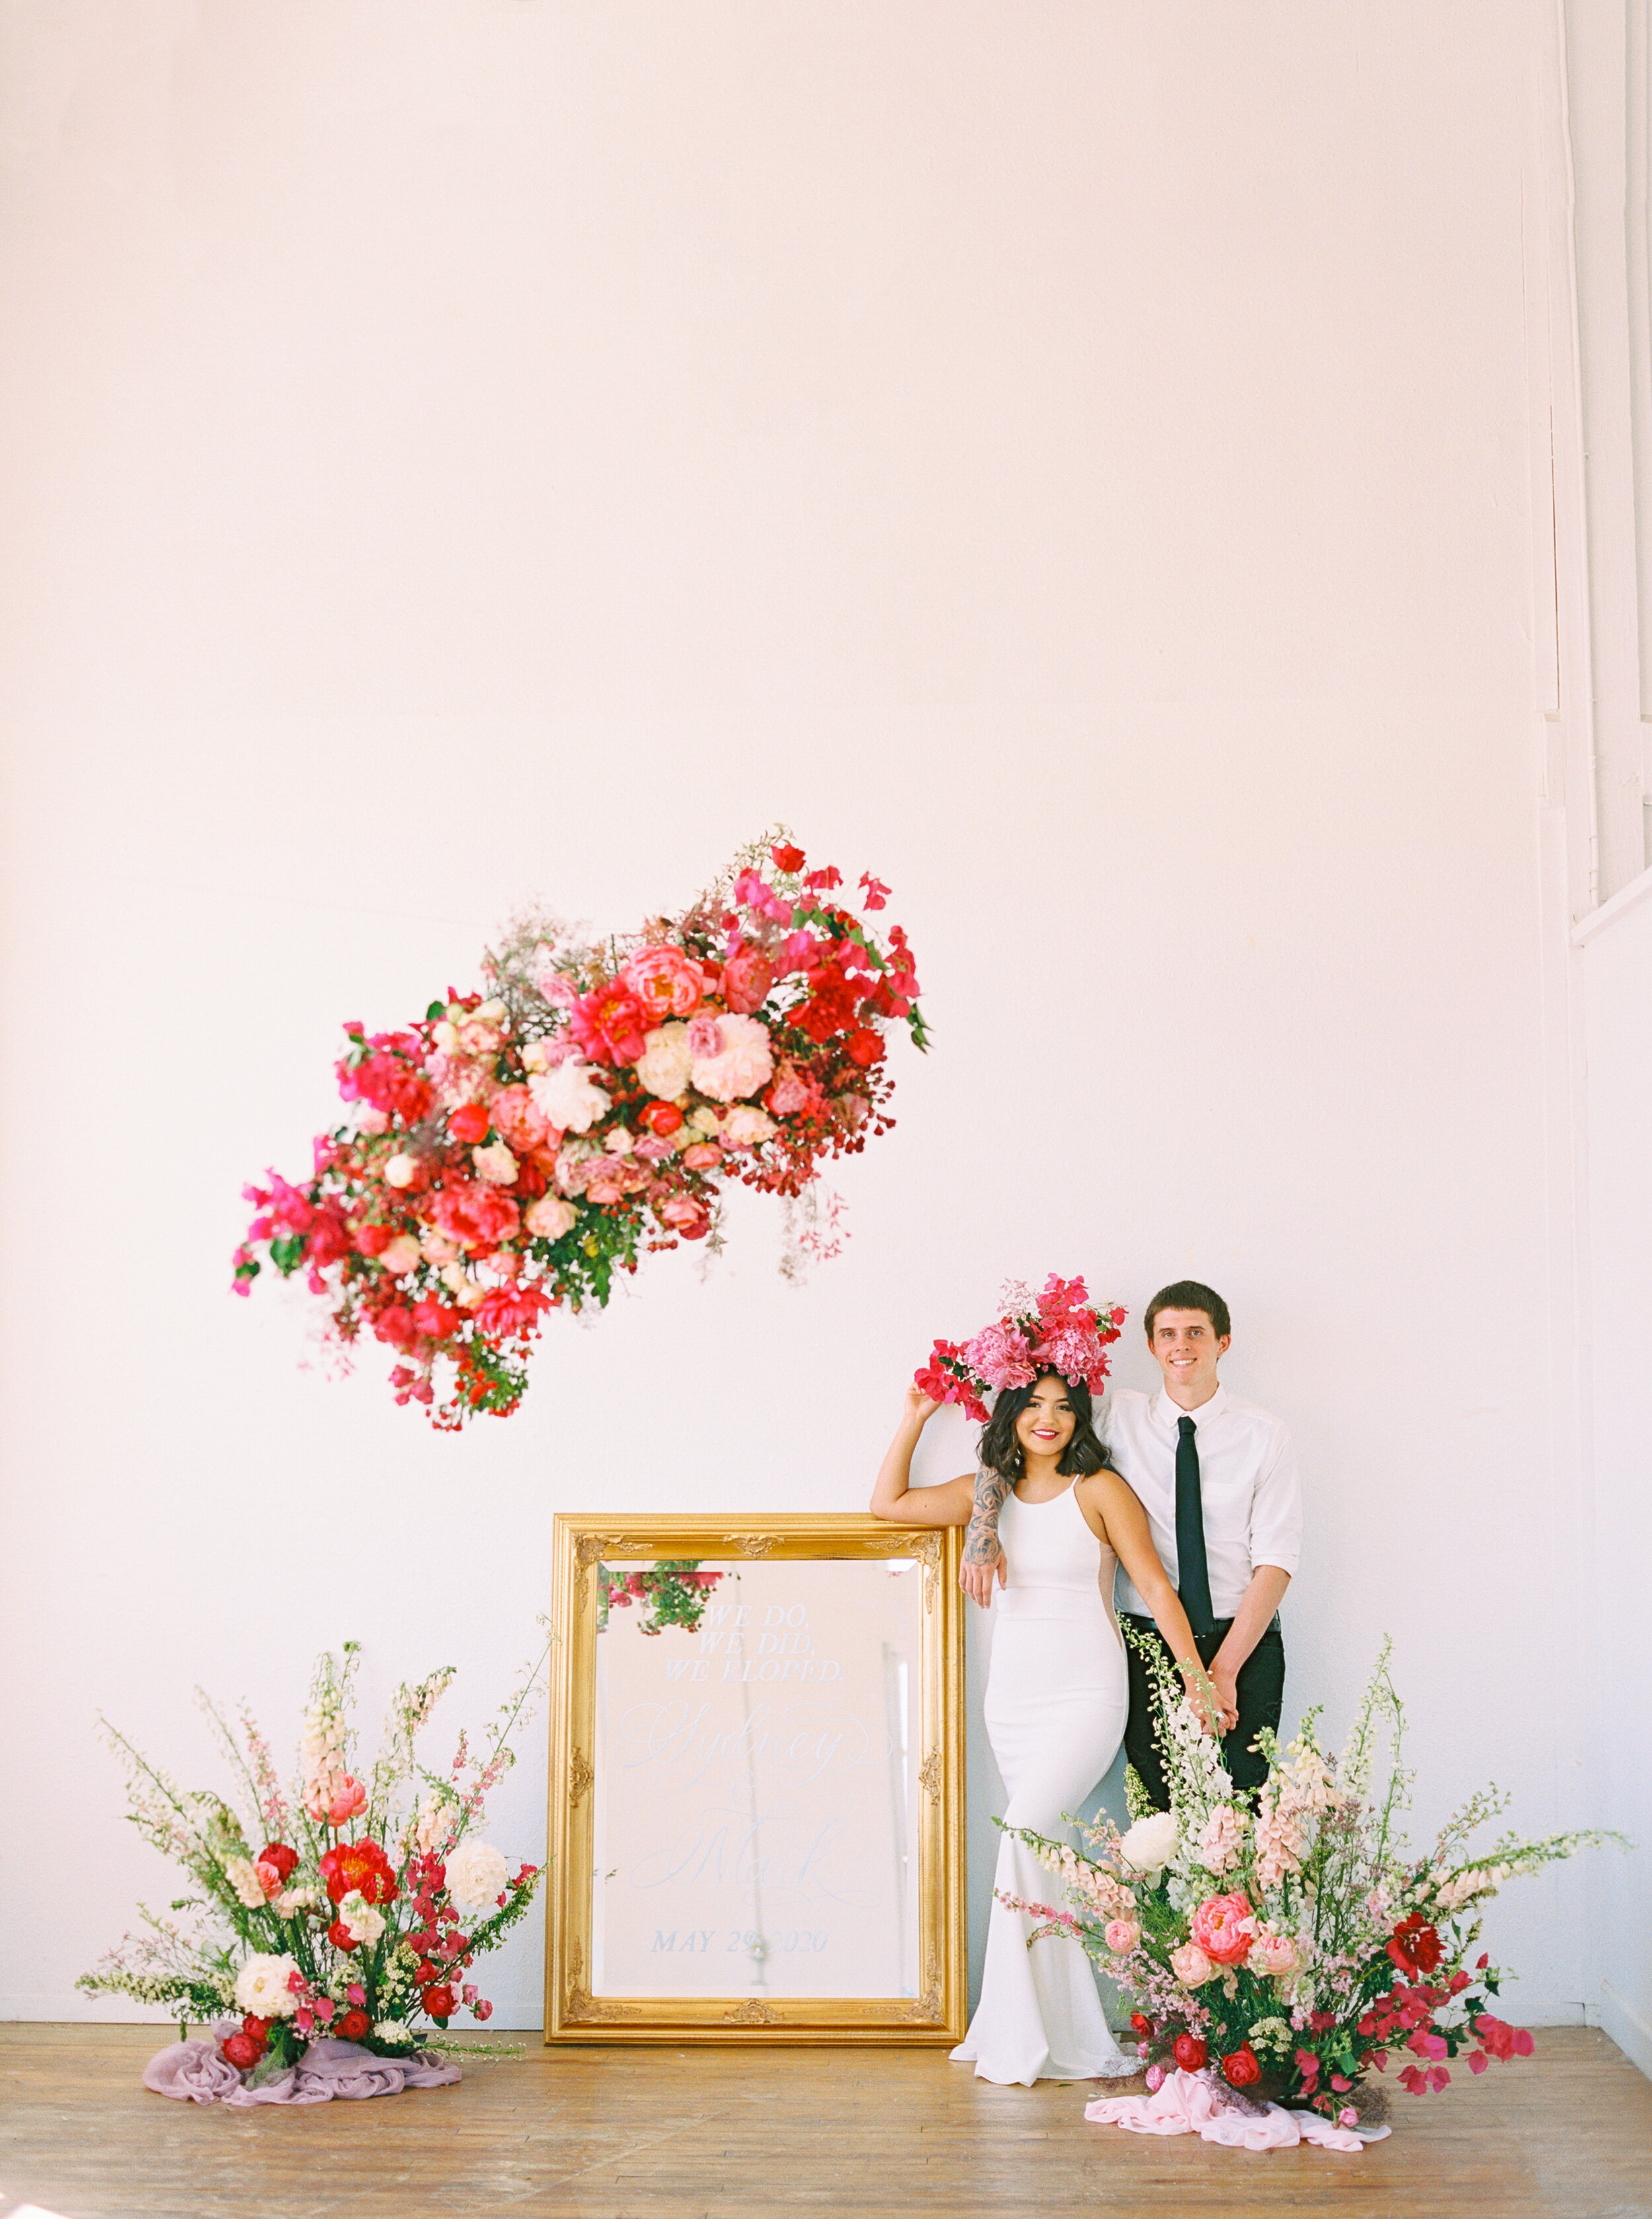 A Romantic Wedding Elopement Filled with Colorful Fuchsia - Sarahi Hadden Submission-14.jpg